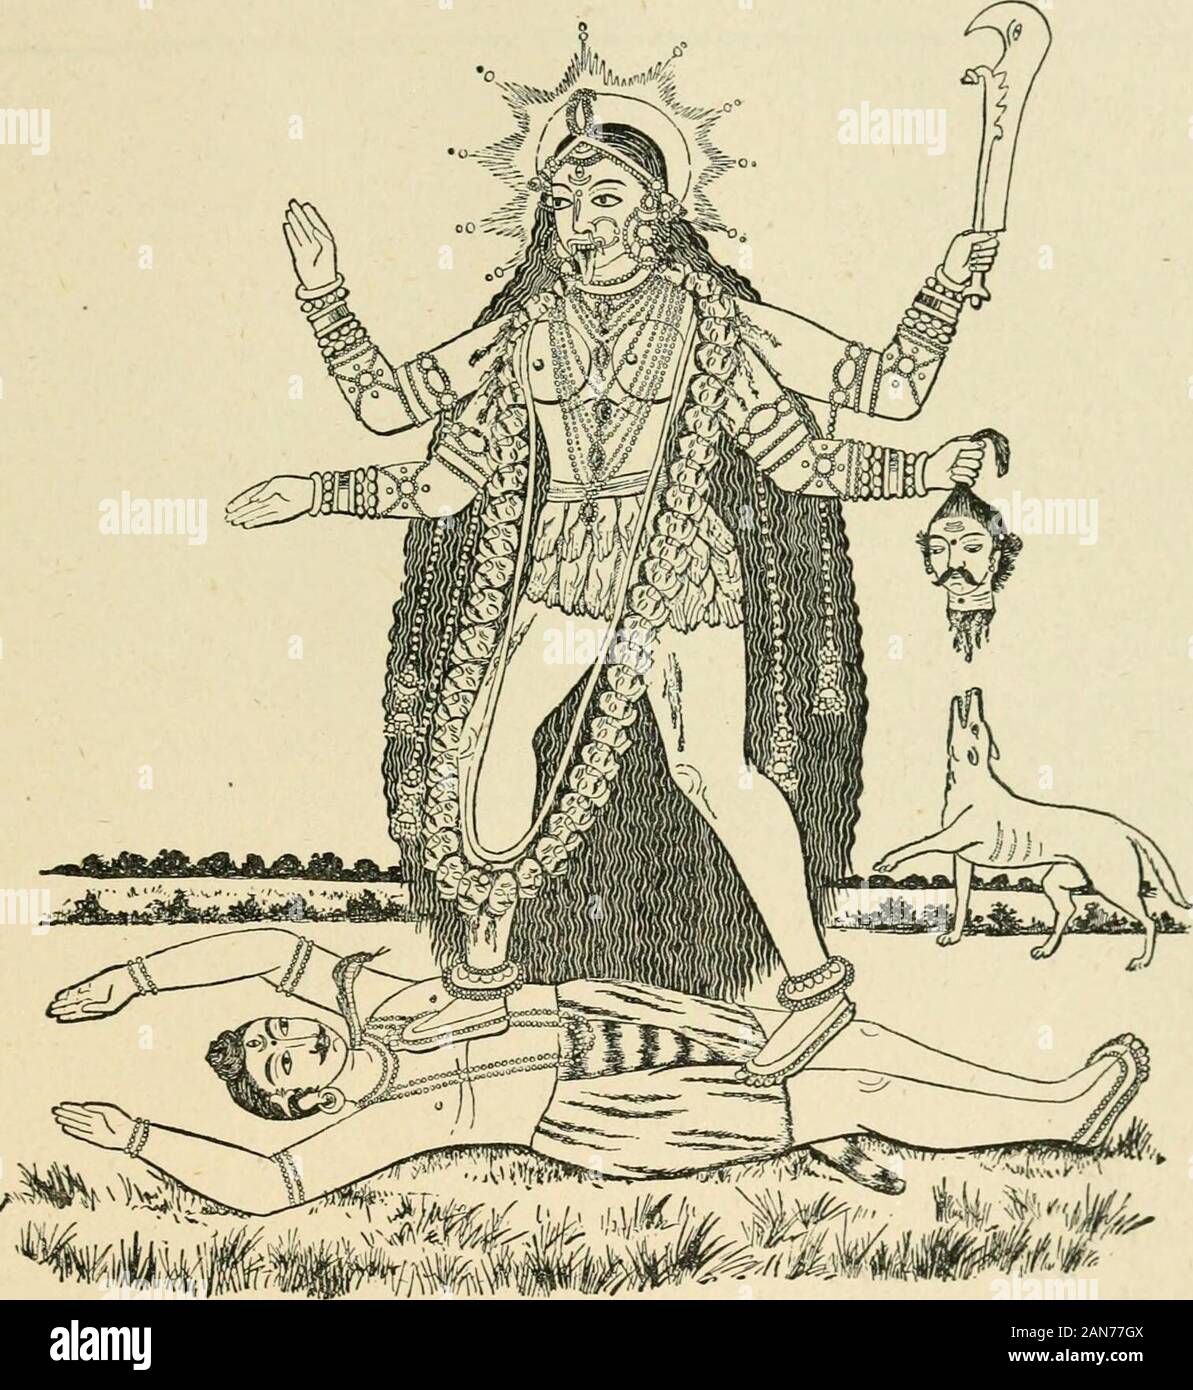 Hindu mythology, Vedic and Purânic . The chief Forms of Durga. 259 thousand ? Destroy him too, said Rama. Sita advisedhim to remain at home ; but he collected his army of monkeys,and with his wife and brothers set off for Satadwipa to meet thisnew Ravana. Hanuman was despatched to discover the re-sidence of the monster, and to gather all the information he. KALI DANCING ON SIVA. could about him, and on his return Rama went to the attack.The giant regarded the army of his assailant as so manychildren. He shot three arrows. One of these sent all themonkeys to their home at Kiskindha ; a second d Stock Photo